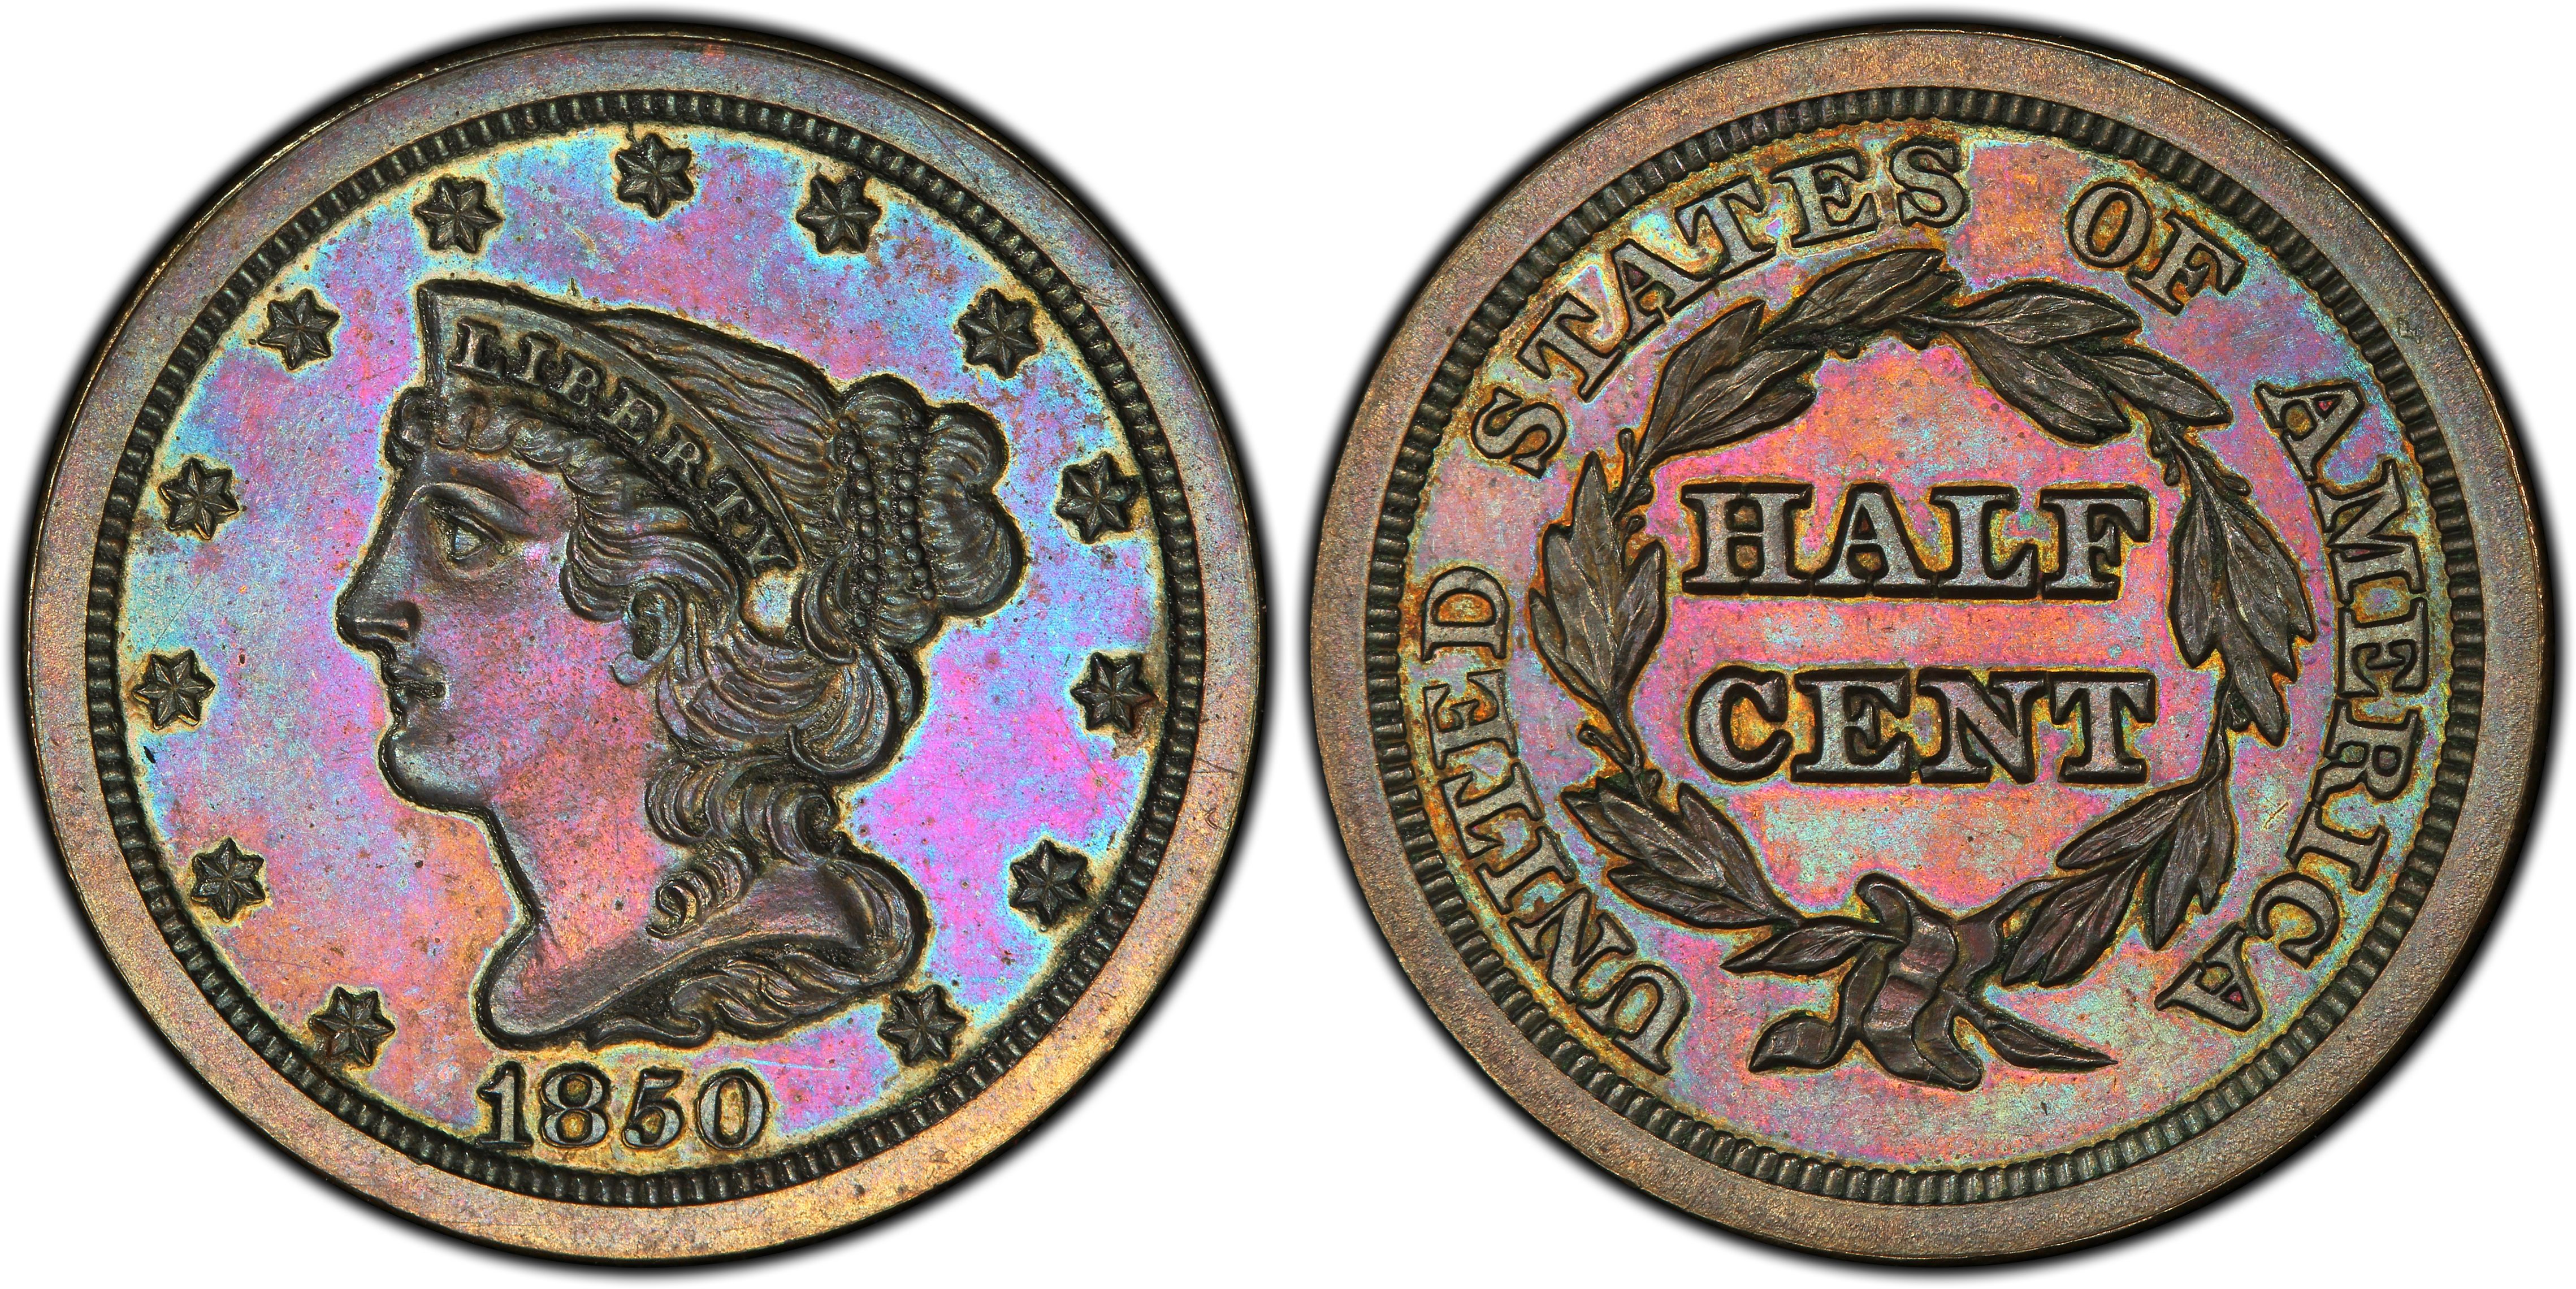 1855 1/2C, BN (Proof) Braided Hair Half Cent - PCGS CoinFacts